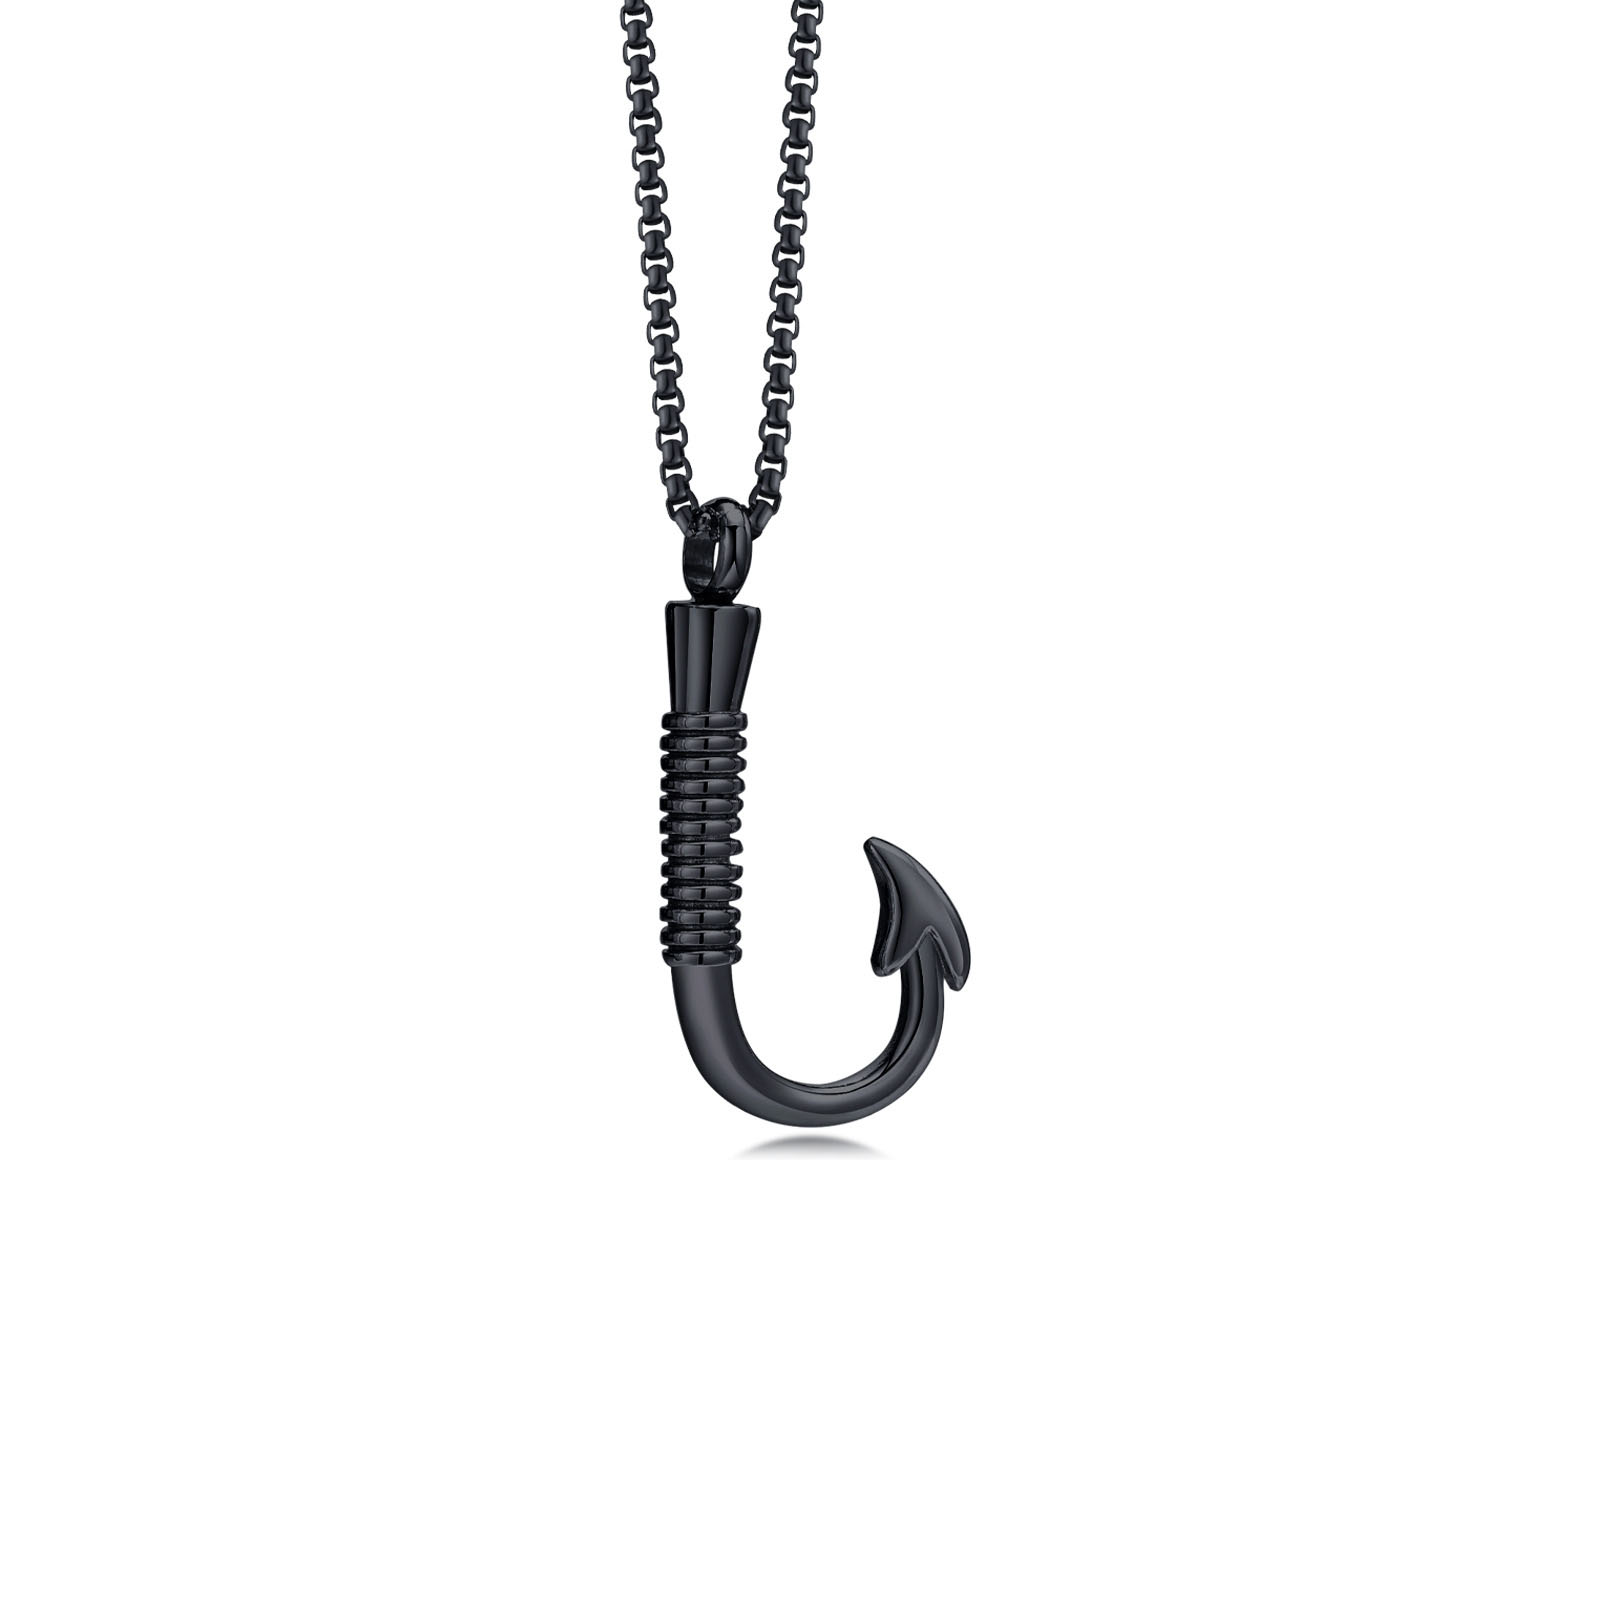 4:Black pendant with chain